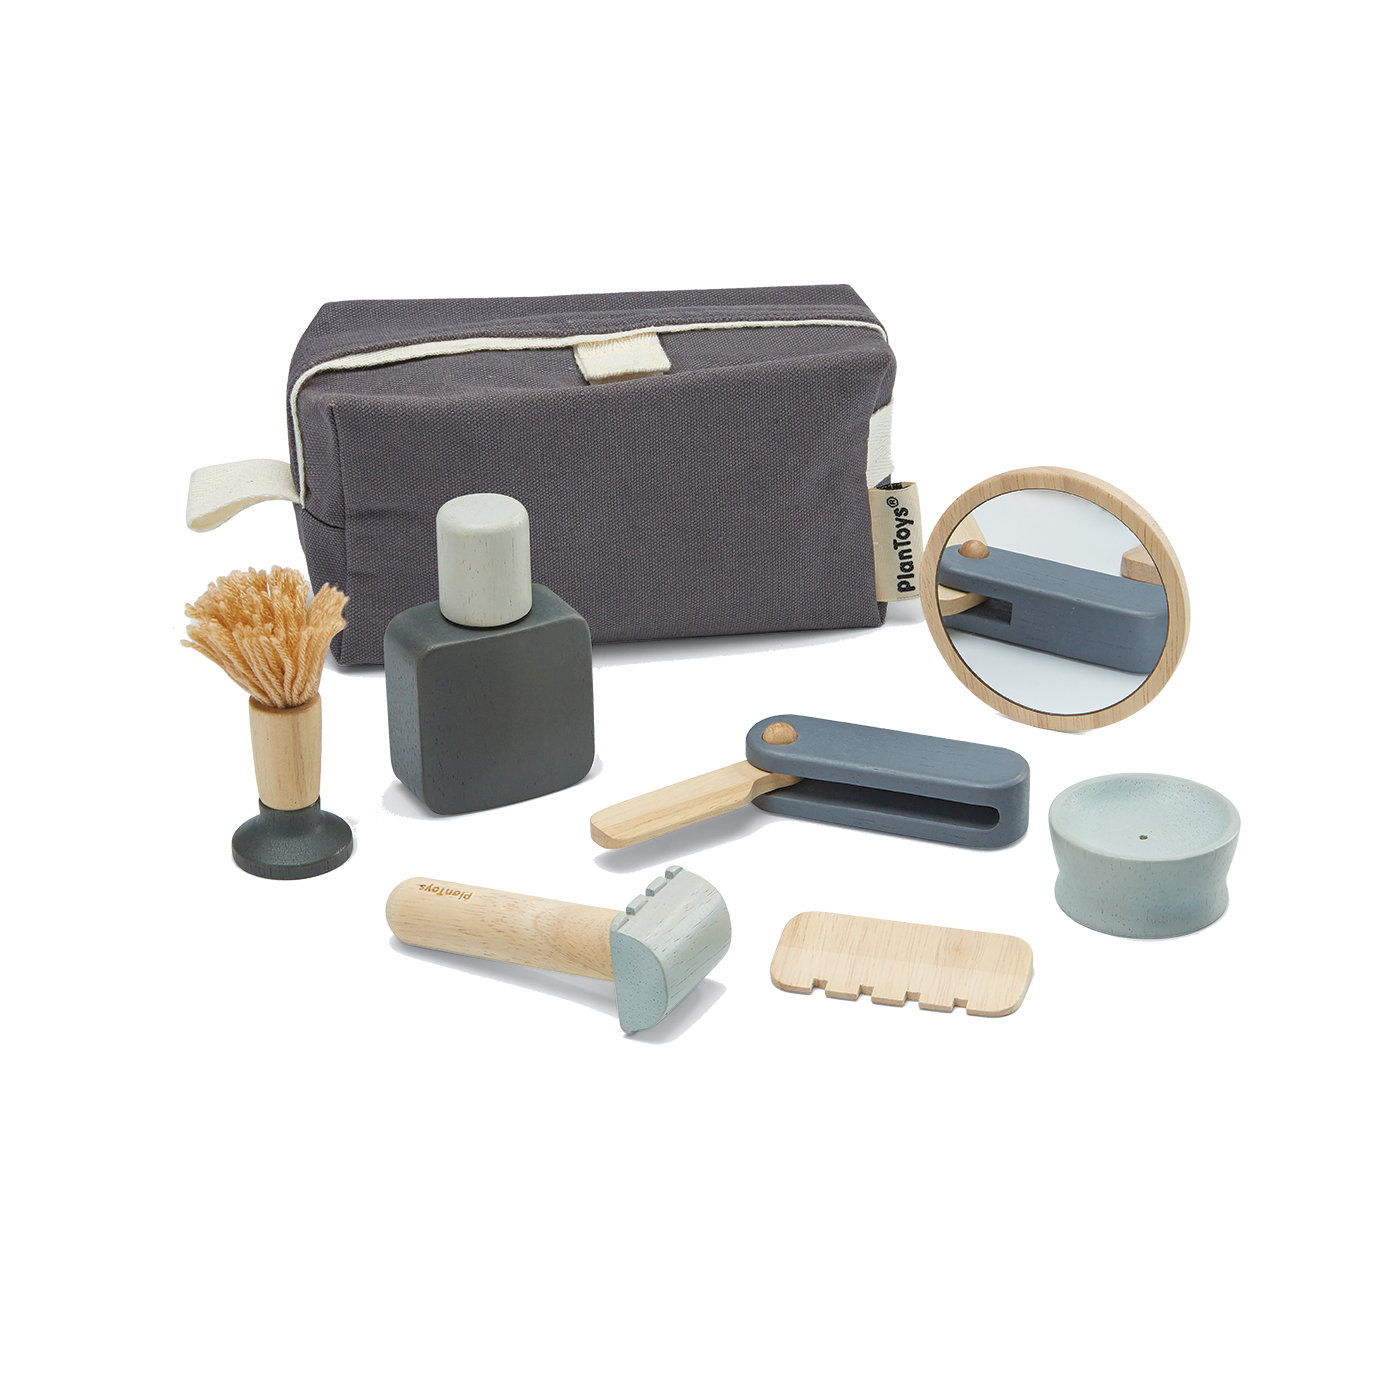 Shave Kit by PlanToys